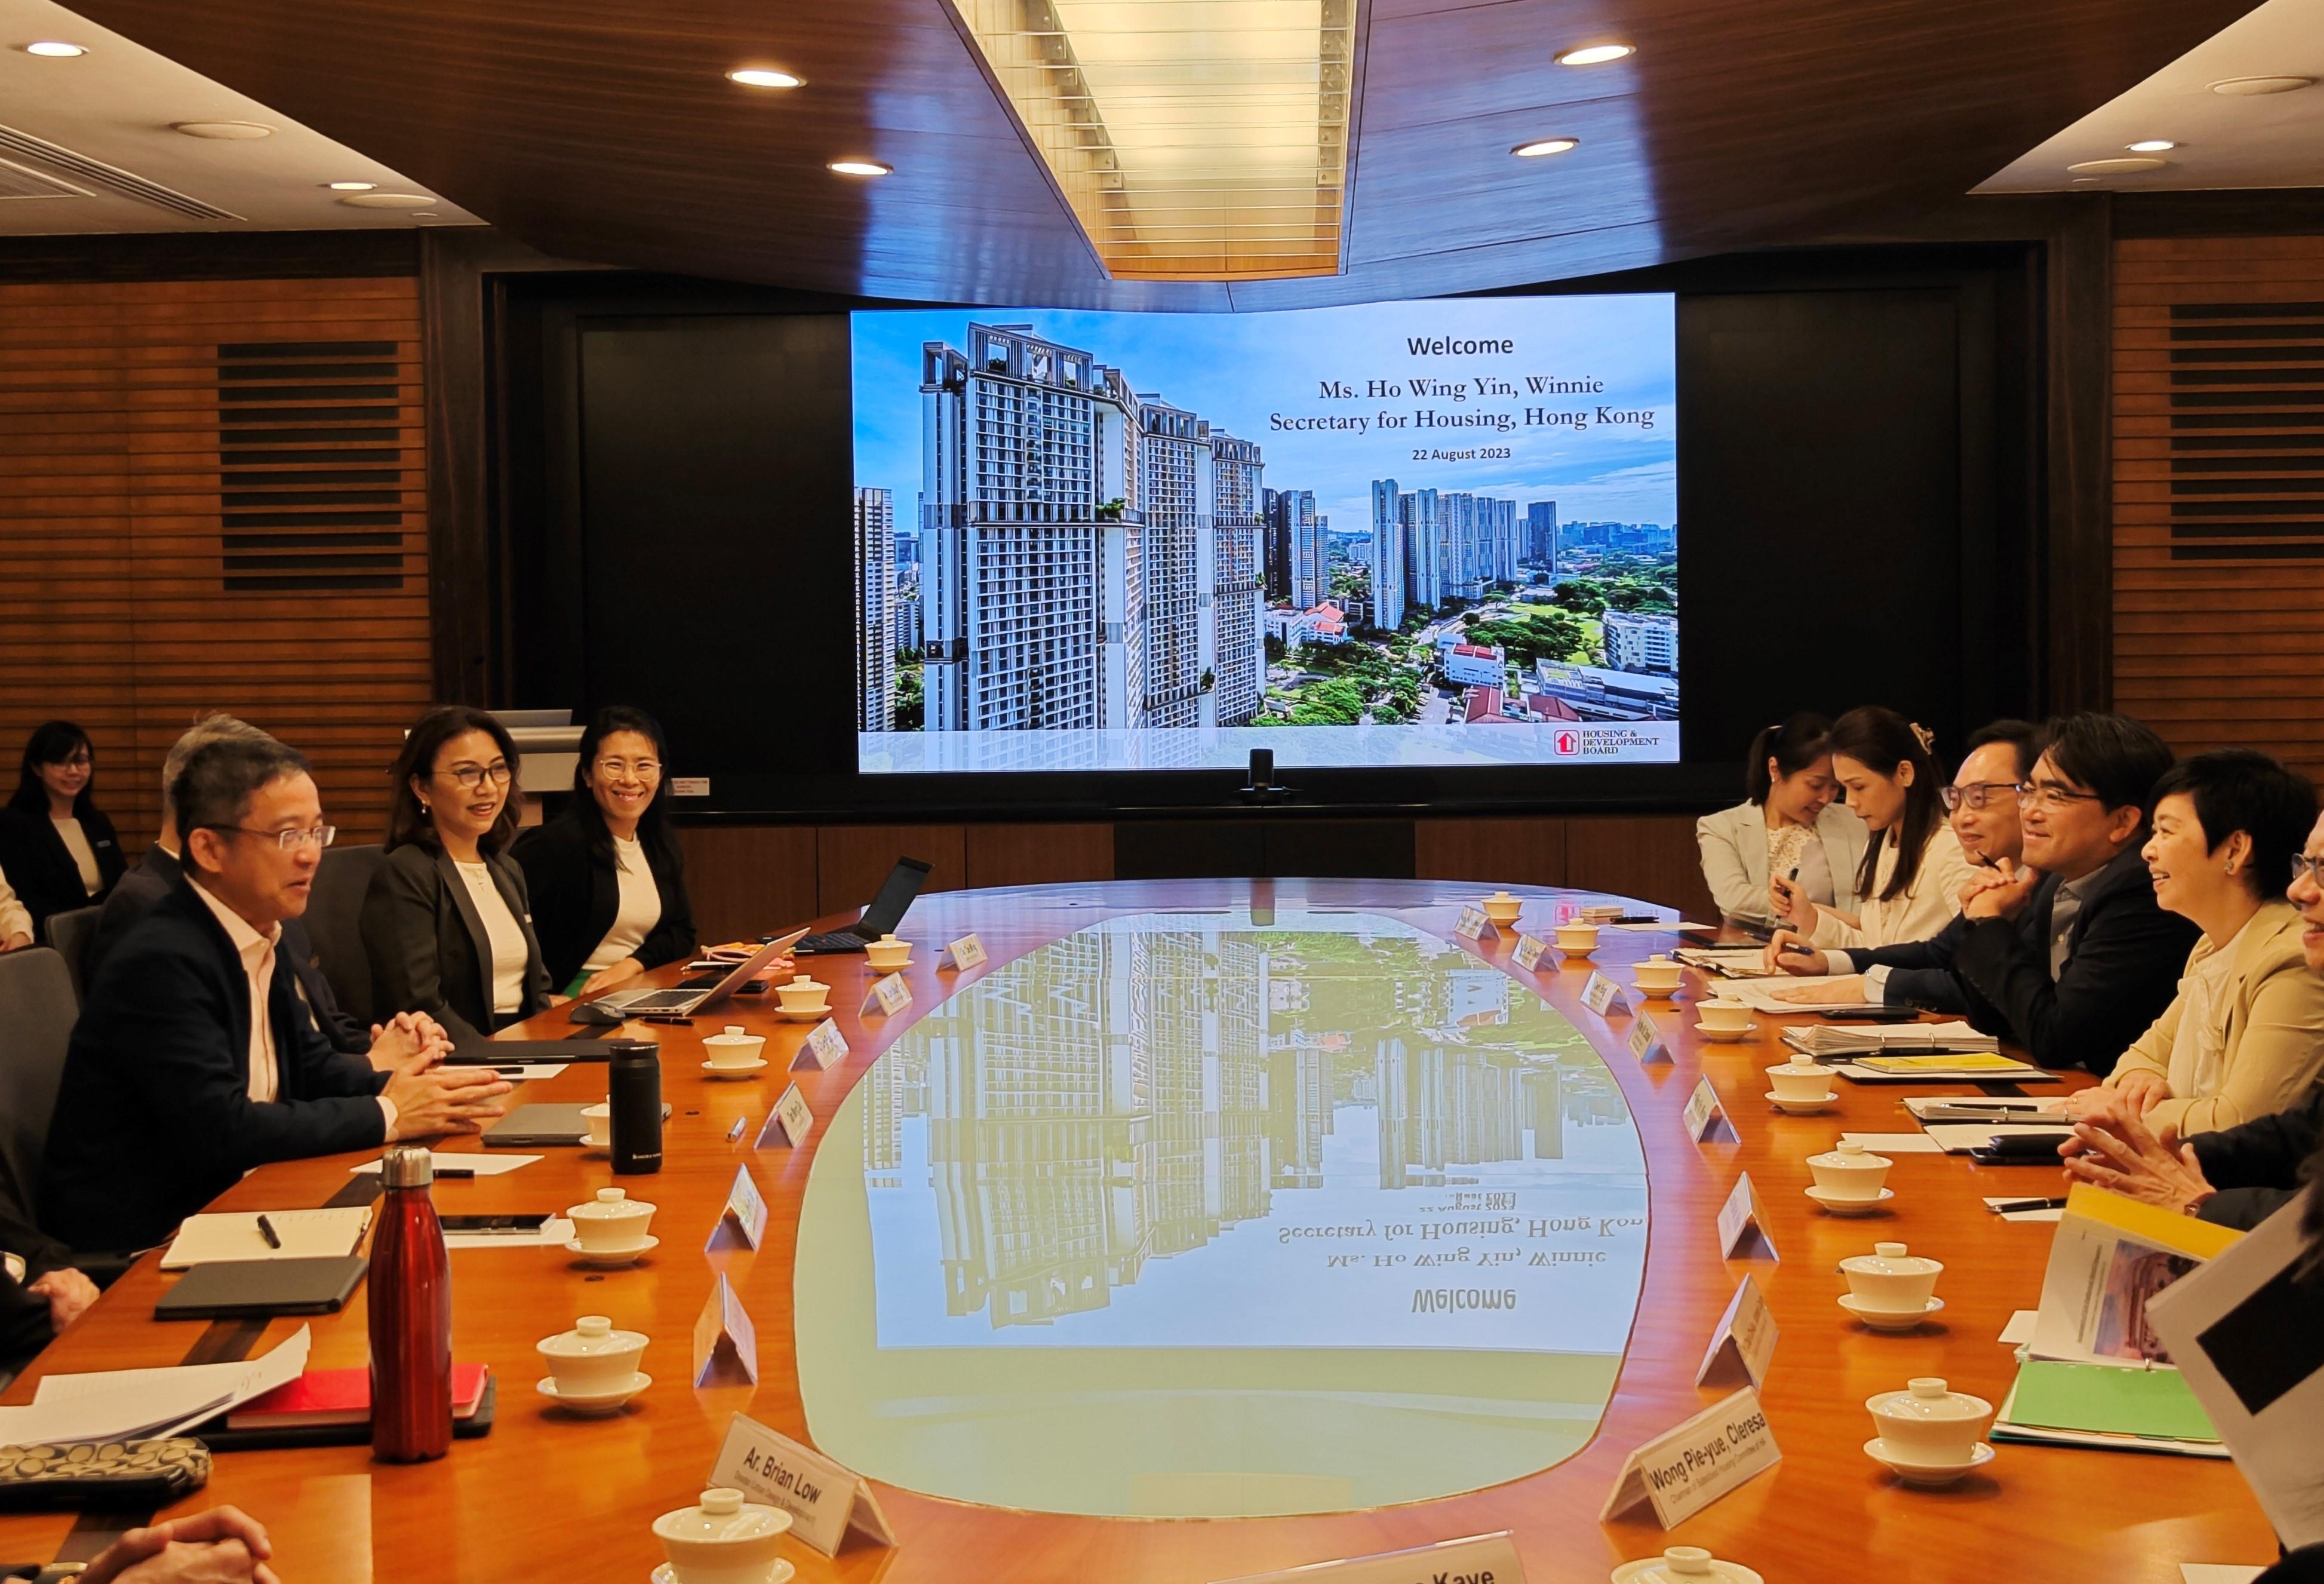 The Secretary for Housing, Ms Winnie Ho, began her visit to Singapore yesterday (August 22). She met with local government officials to exchange views in areas such as housing policies, innovative construction technologies and green building. Photo shows Ms Ho (first right) meeting with officials of the Housing & Development Board yesterday.